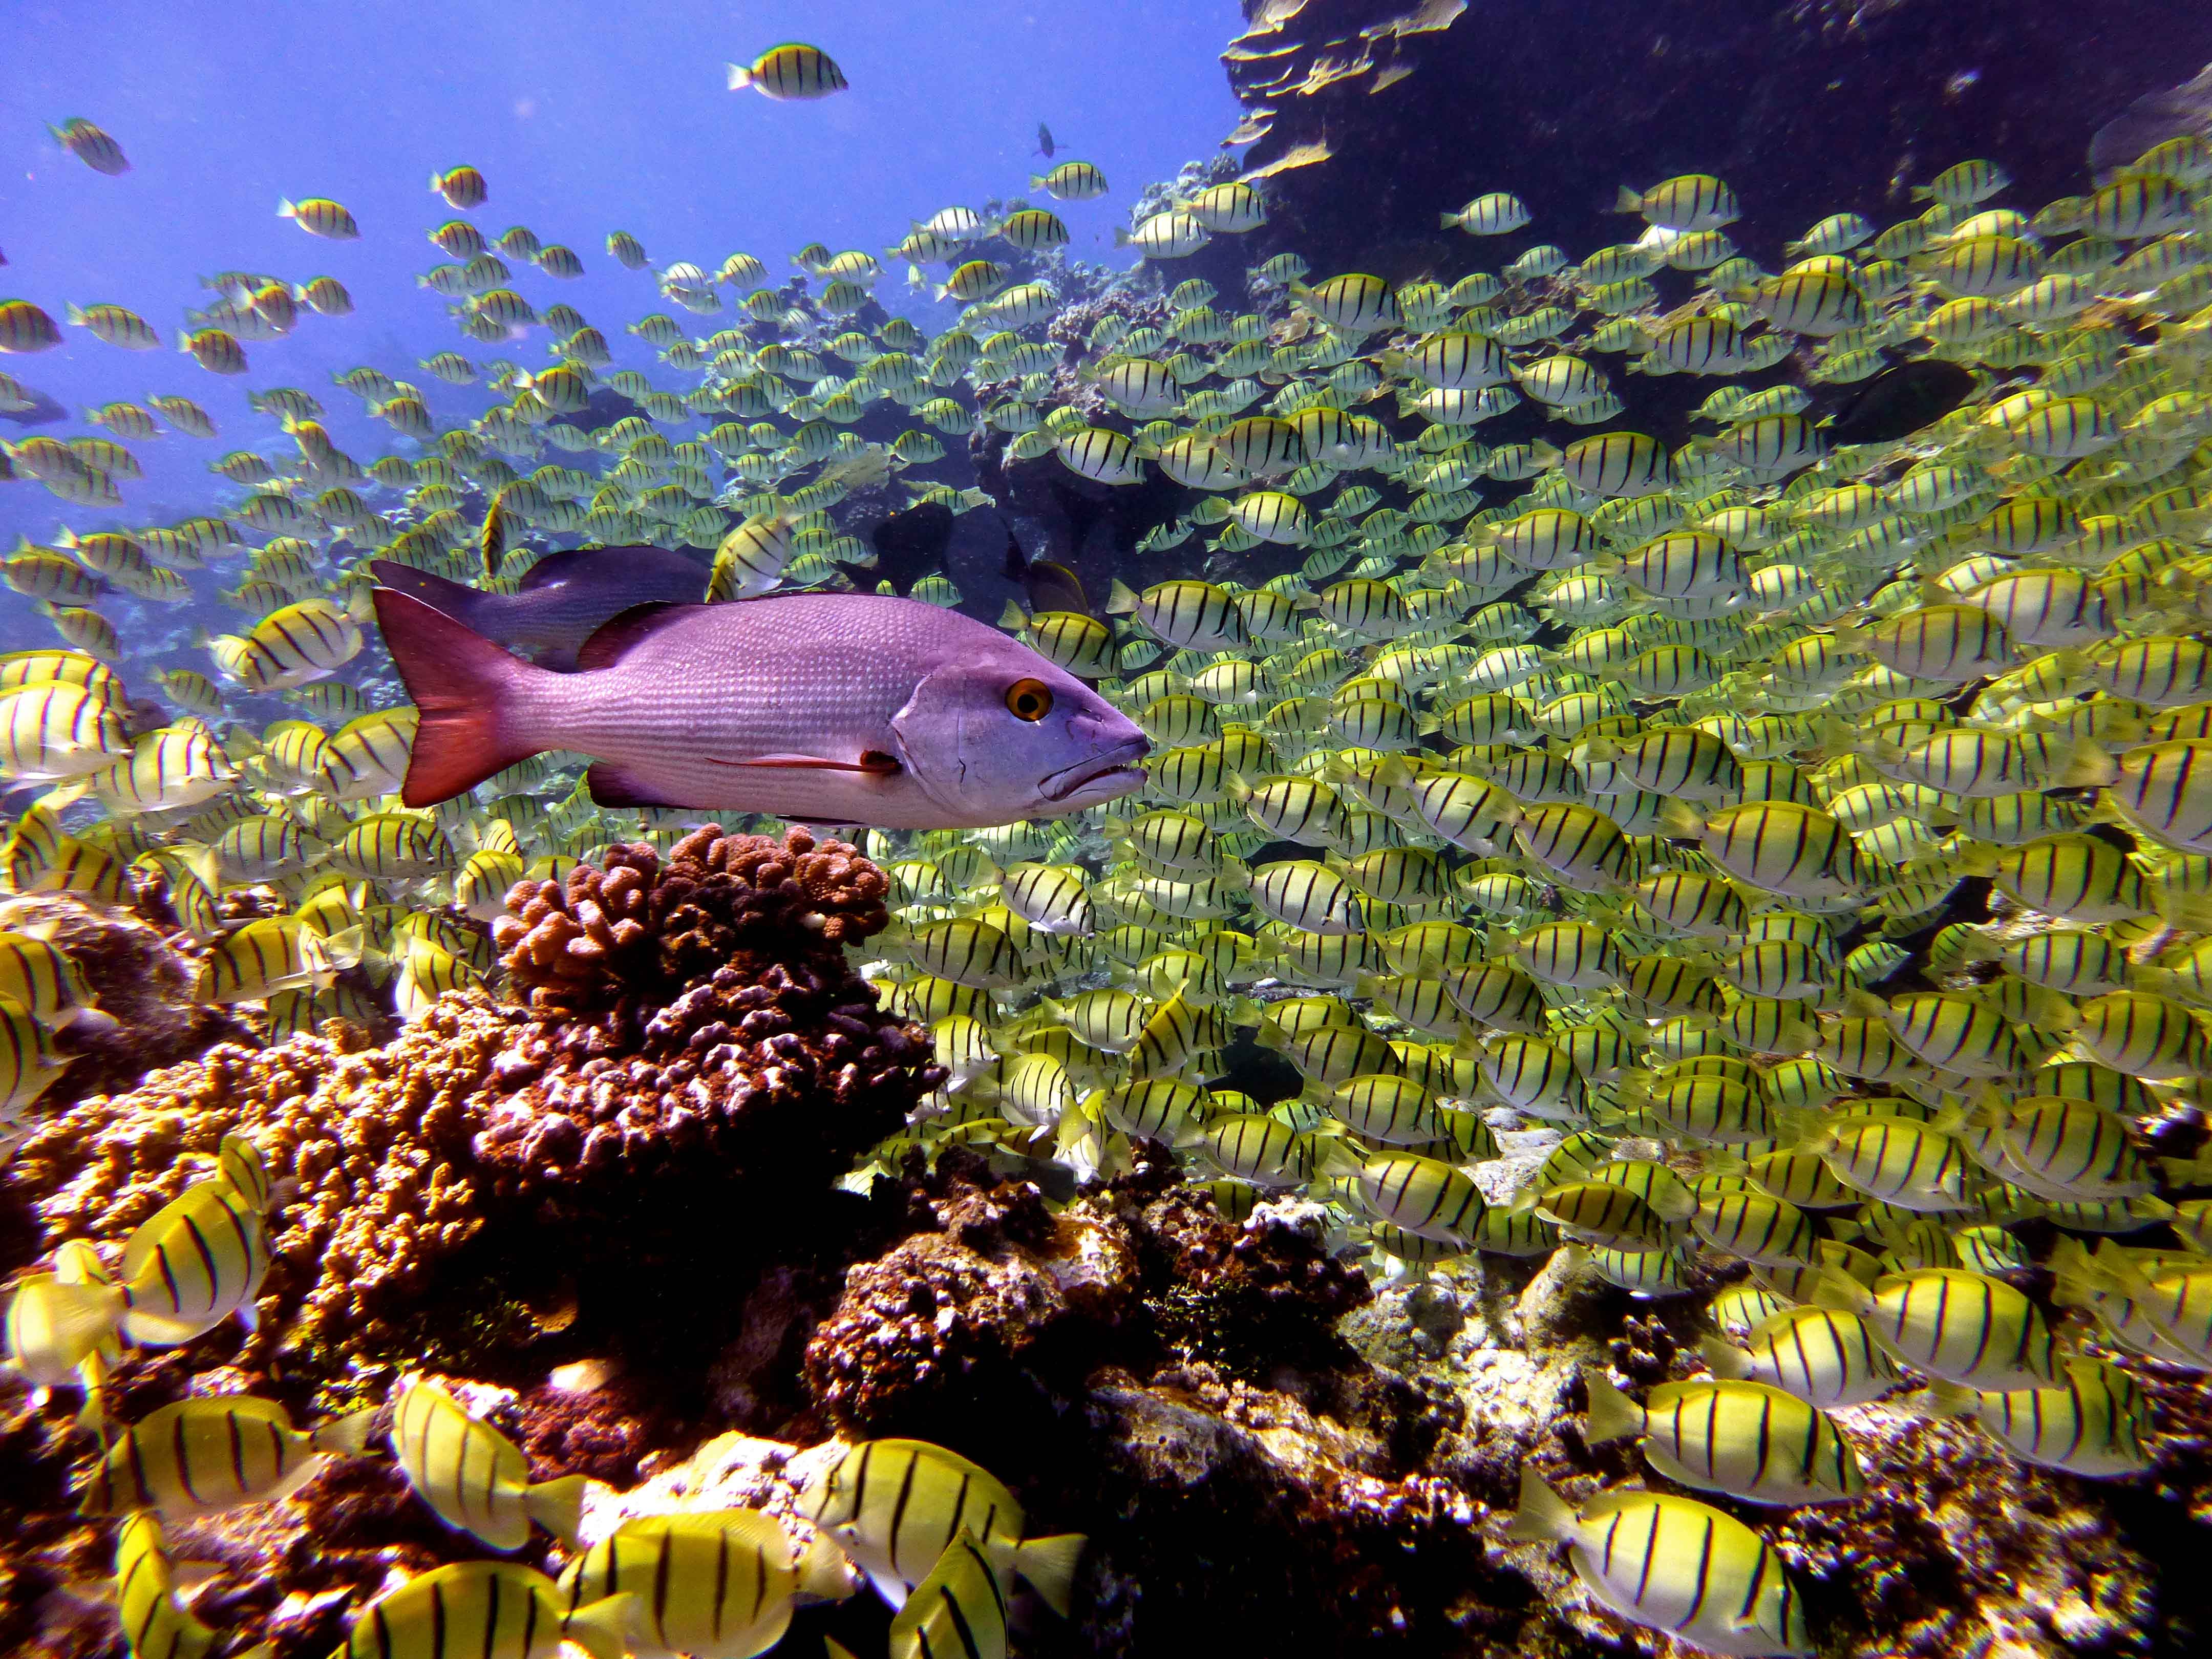 Snapper swims with a school of tangs